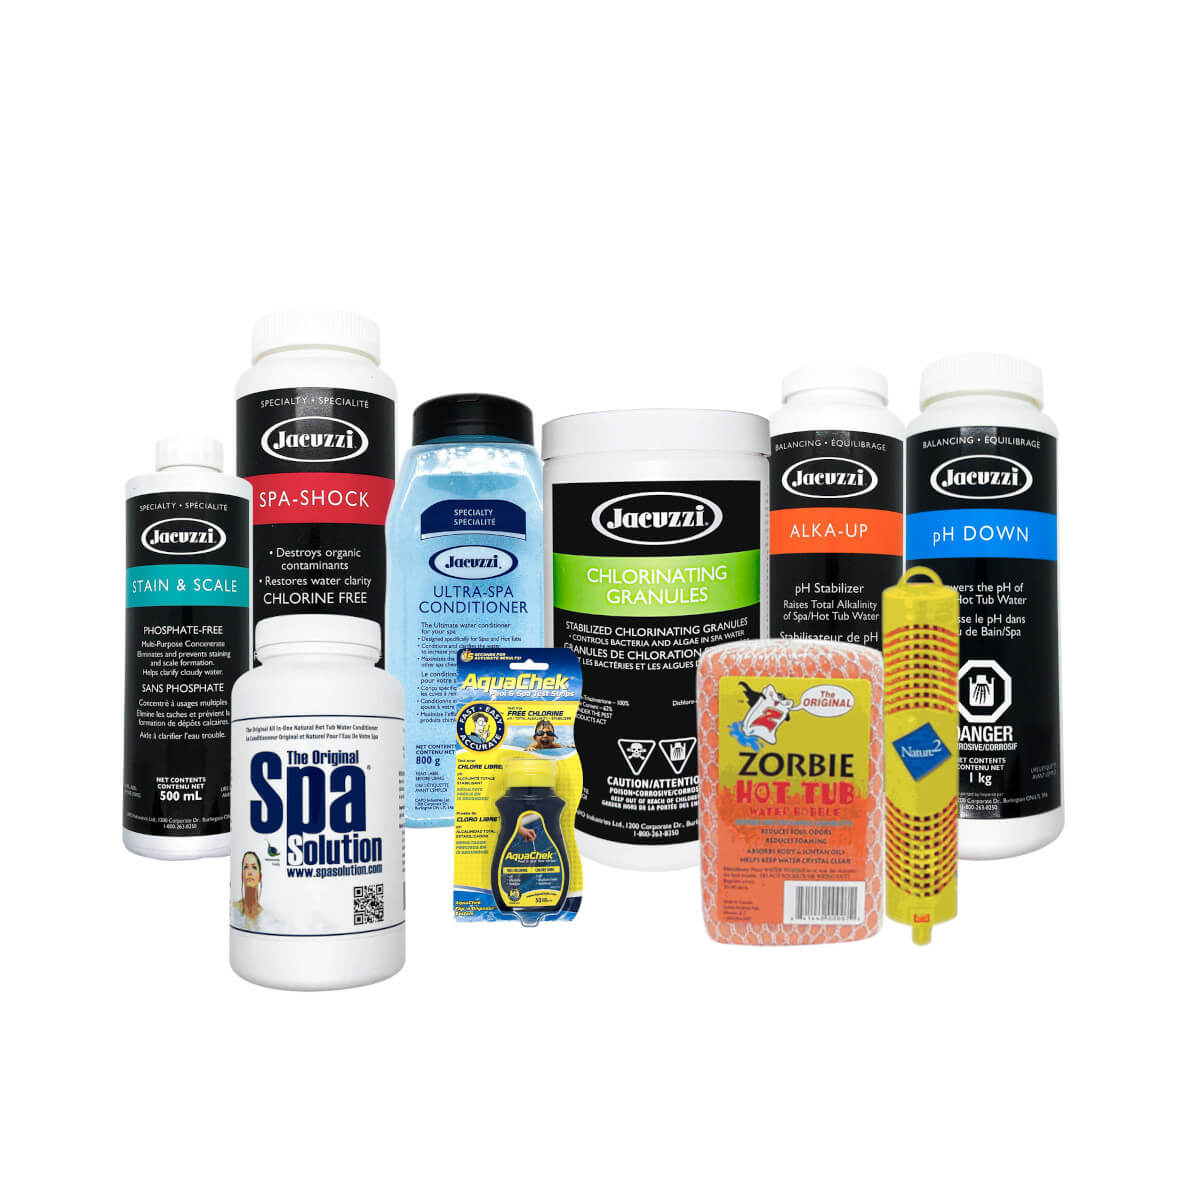 Hot Tub Store Starter Kit - everything you need to get started on the ultimate spa routine. Includes: Jacuzzi brand Chlorine Granules, Stain and Scale, Alka Up, pH Down, Ultra Spa Water Conditioner, Test Strips, Zorbie Scum Sponge, Nature2 Mineral Sanitizer, and Spa Solution Enzymes.